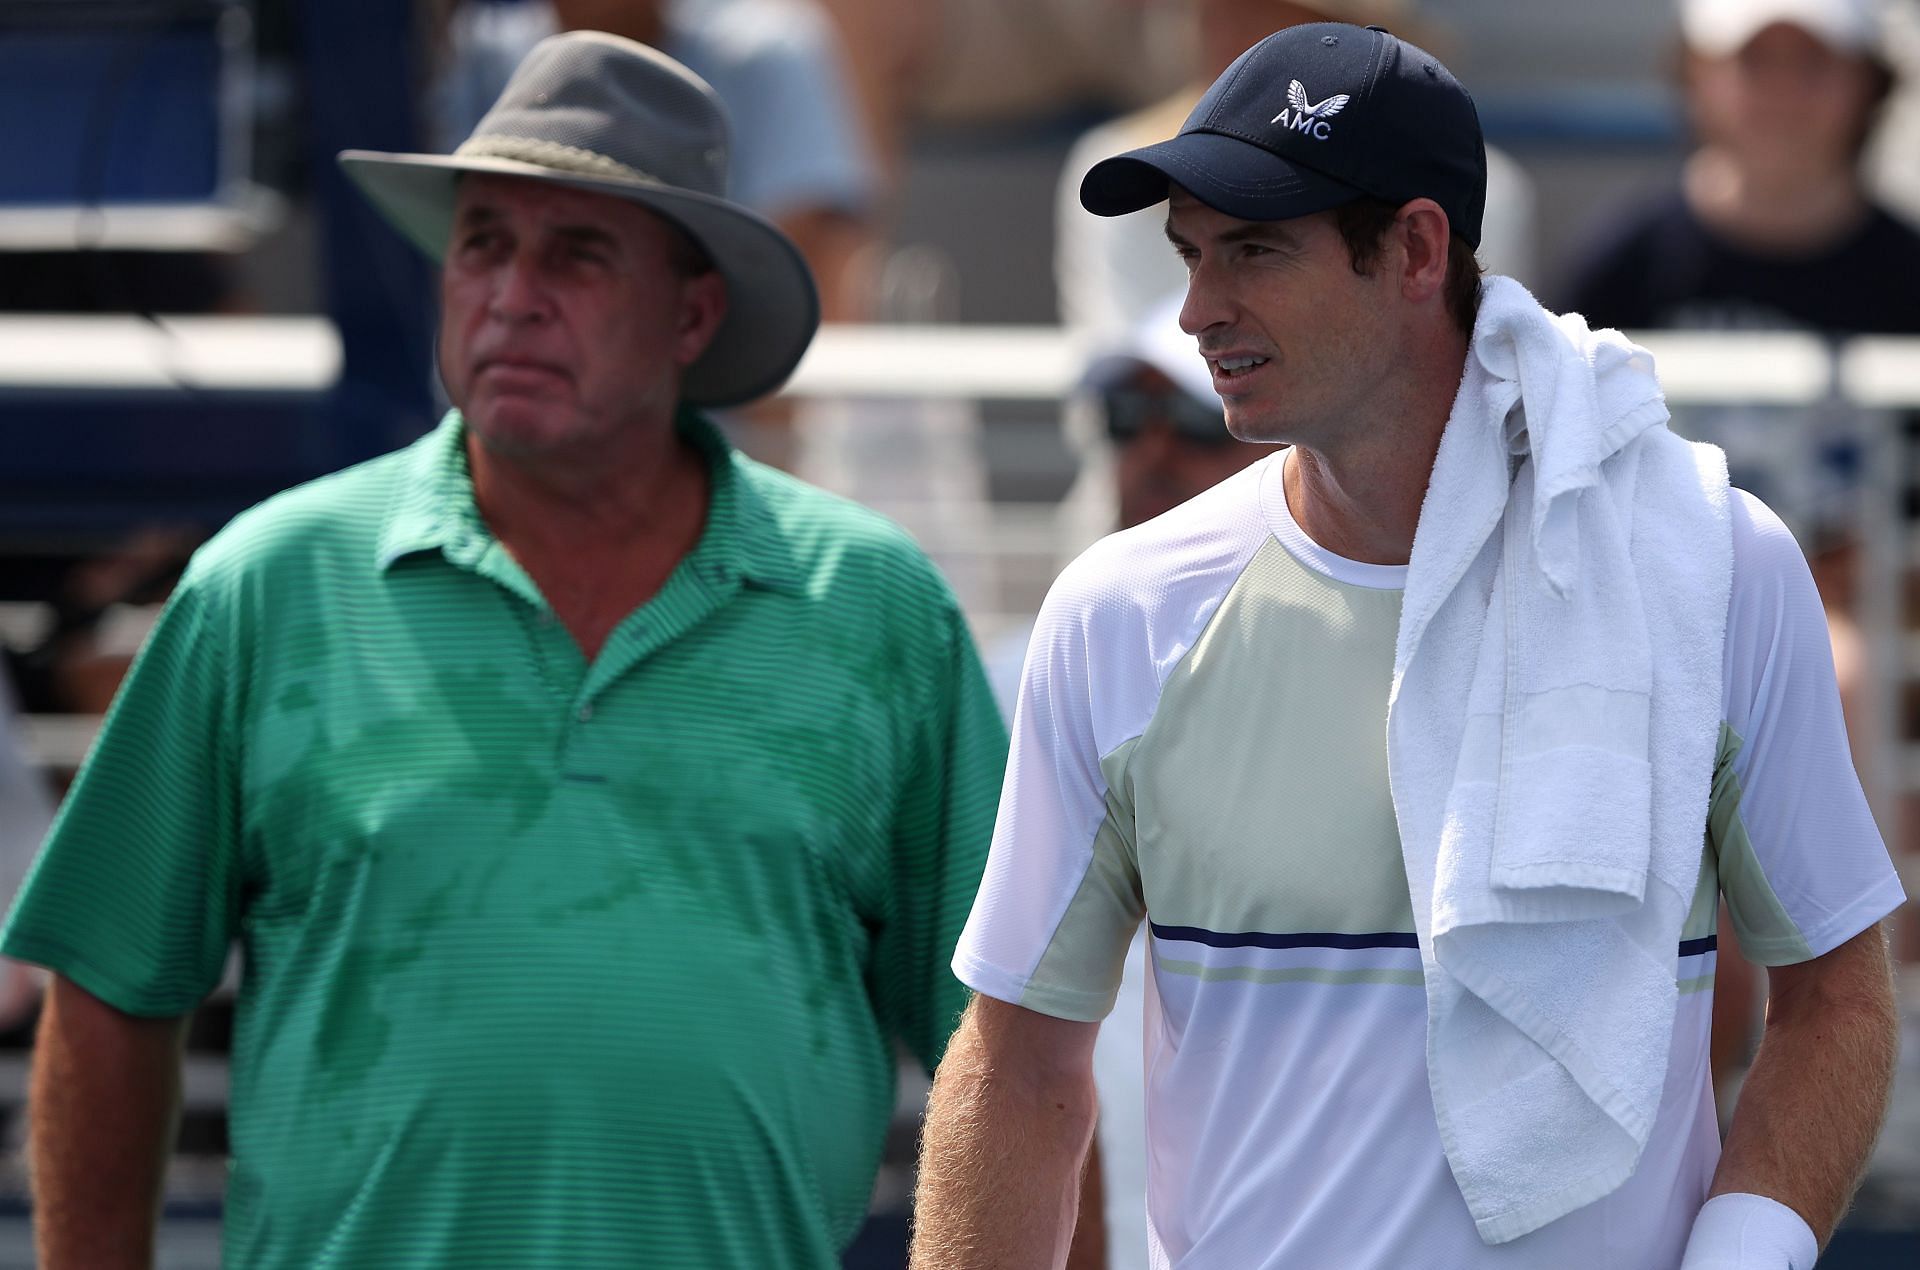 Andy Murray in a practice session with coach Ivan Lendl at the 2022 US Open